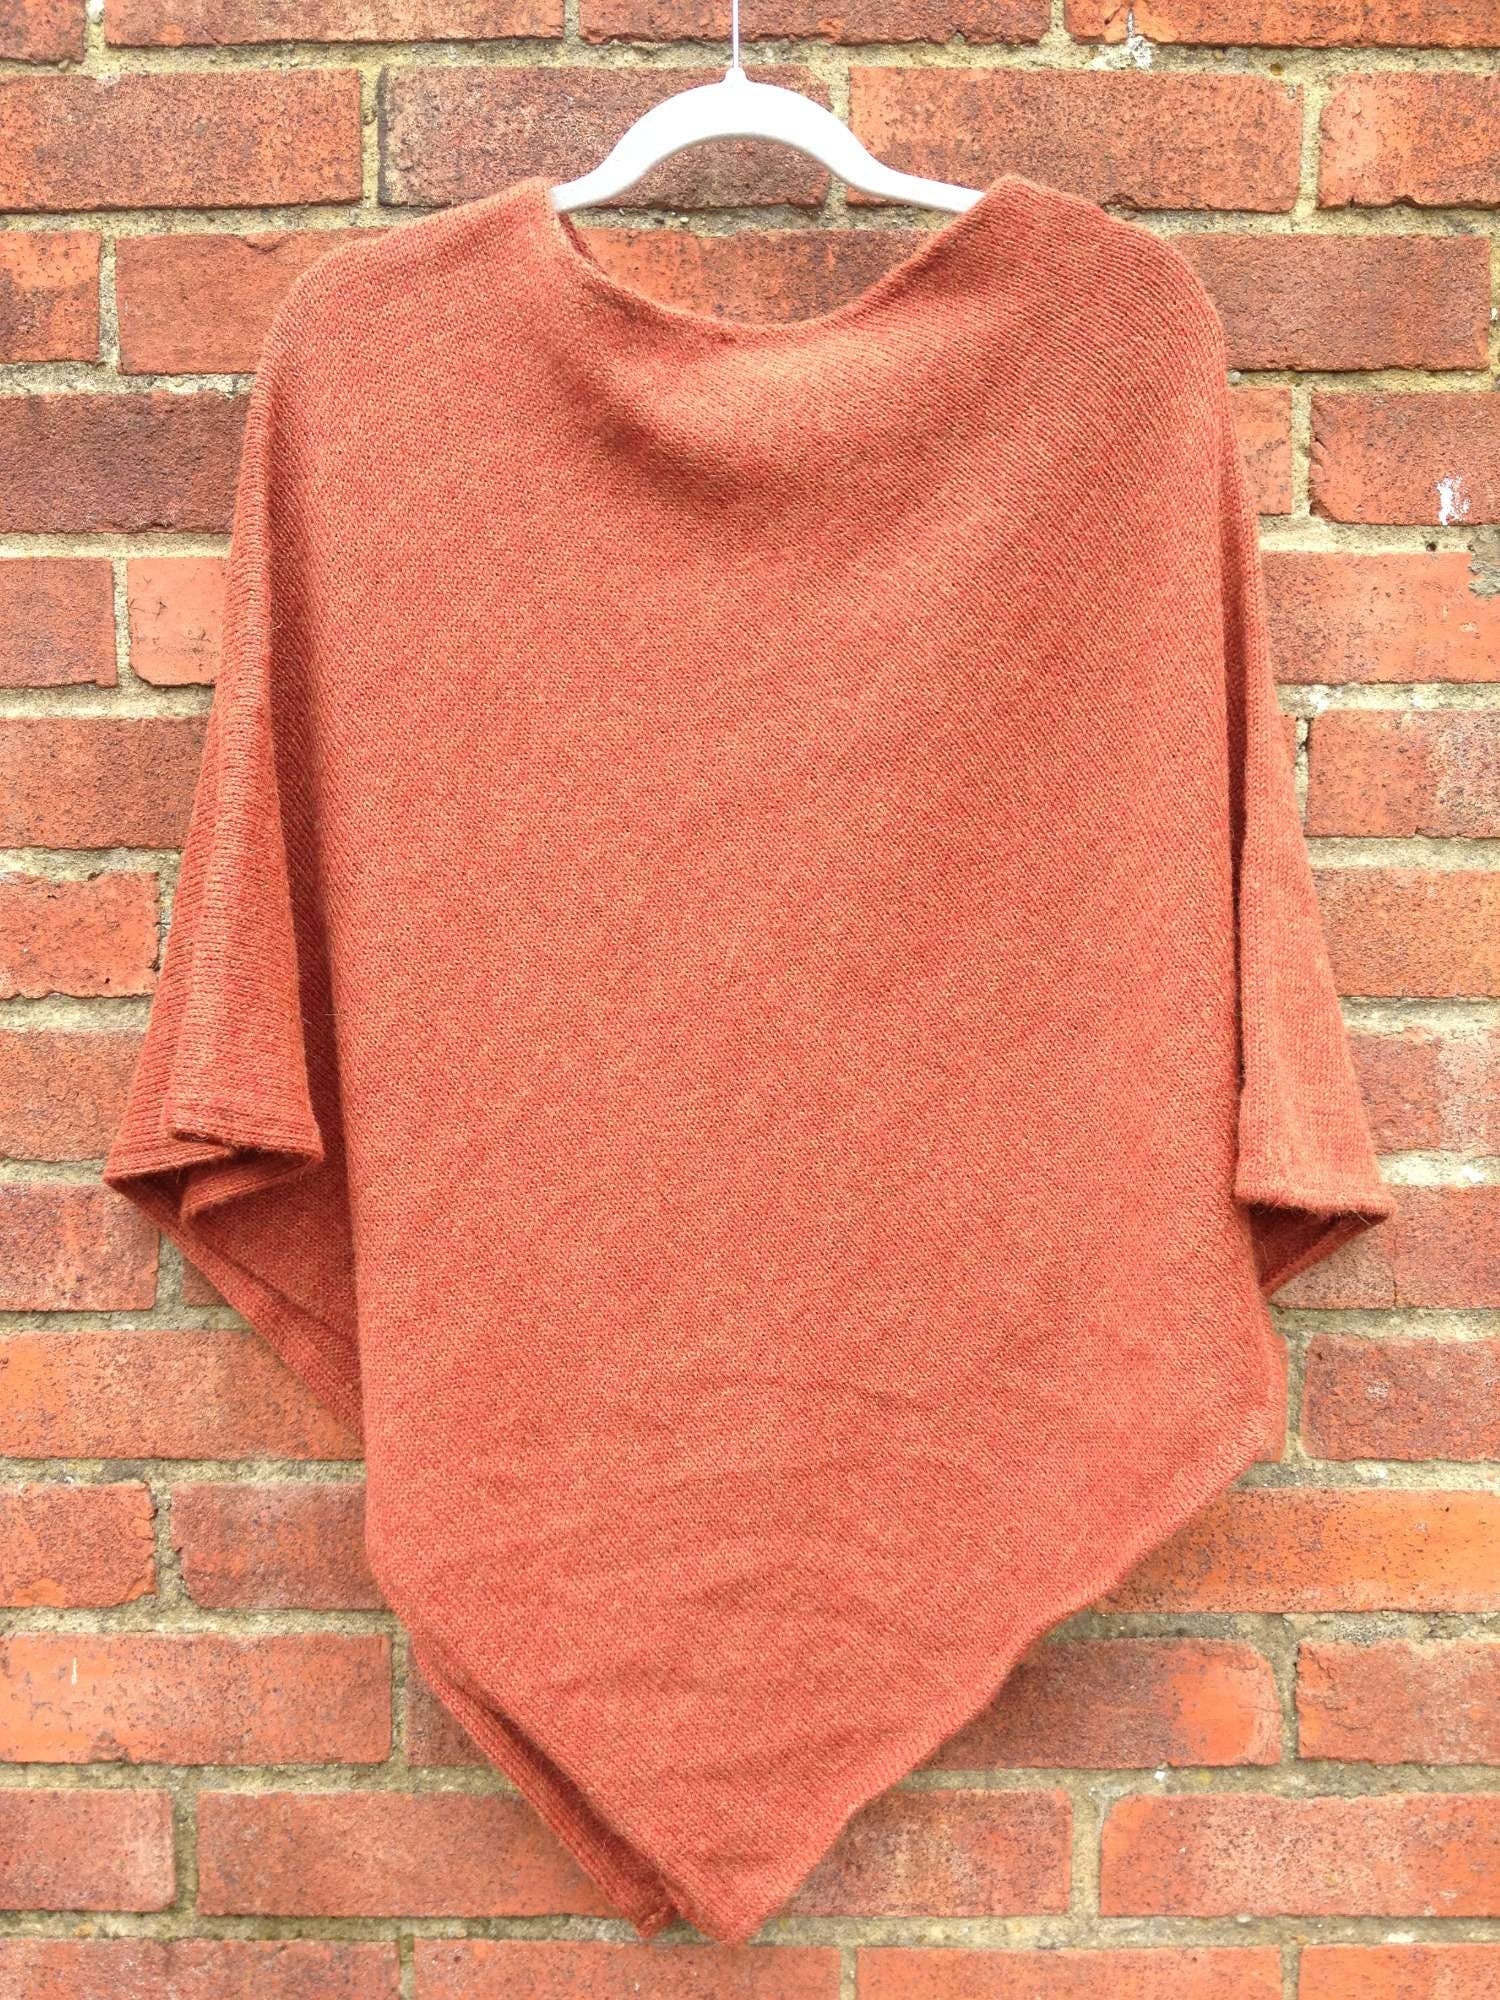 100% Alpaca Poncho, knitted wool, loose fit warm wrap, woollen shawl, winter knit, travel cloak, plastic free, eco gift, ethical, for women